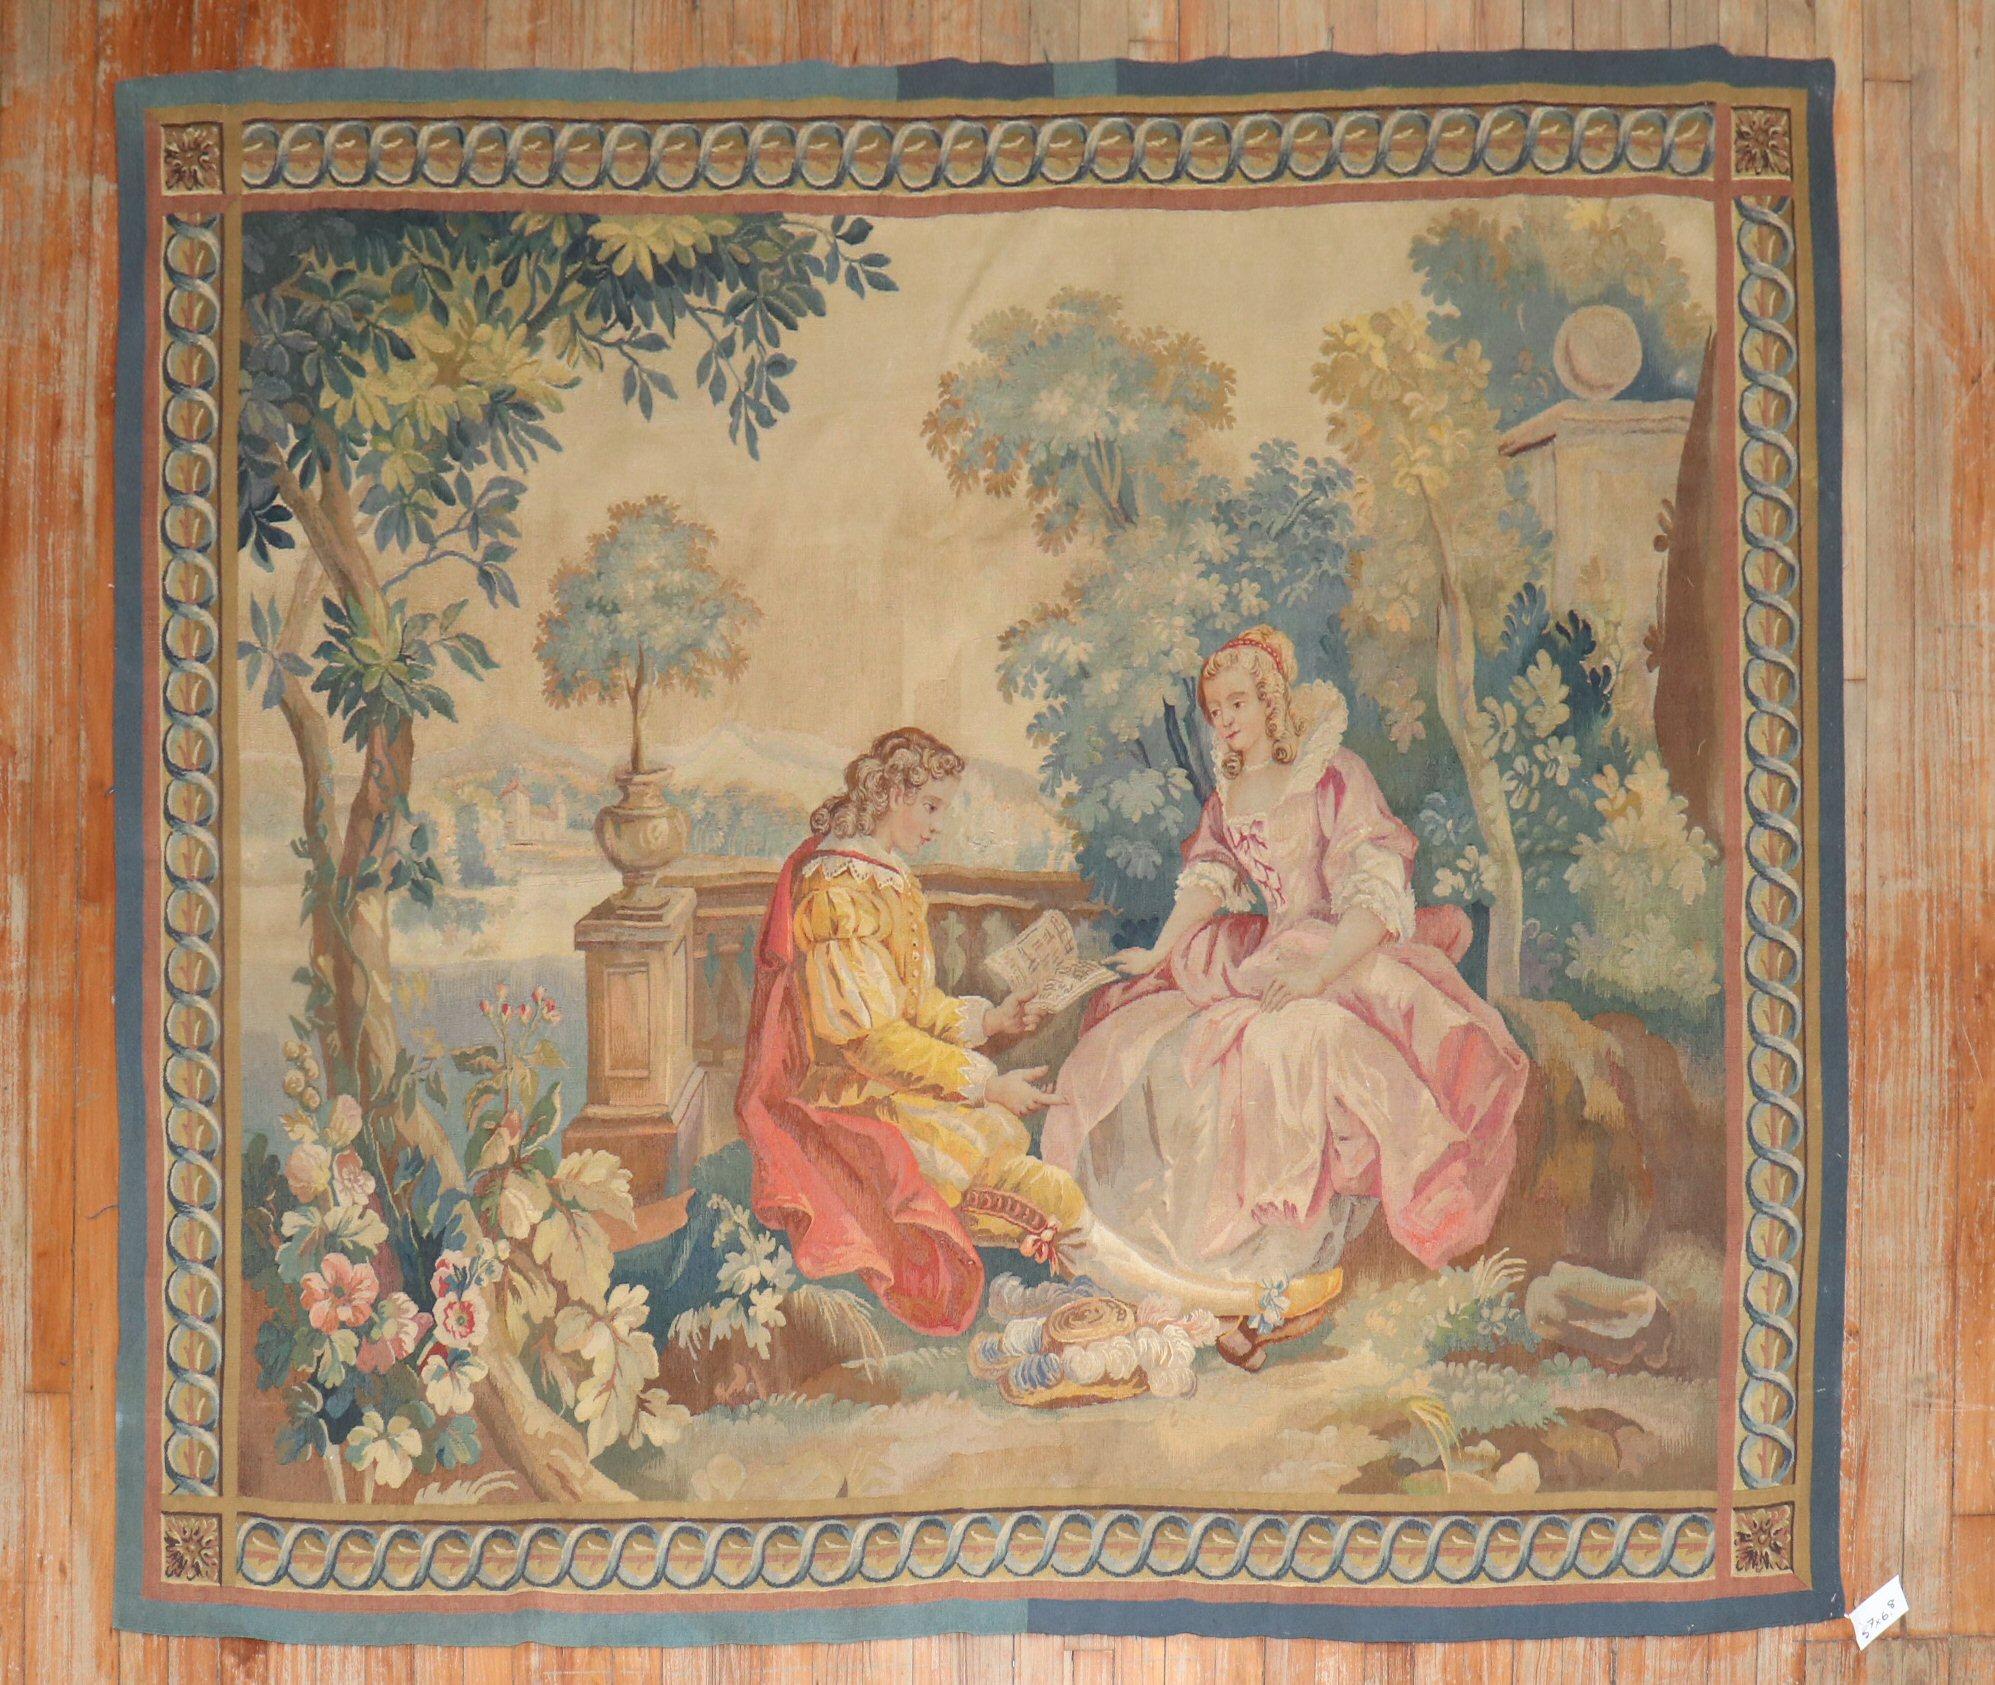 Early 20th century French tapestry.

Measures: 5'7